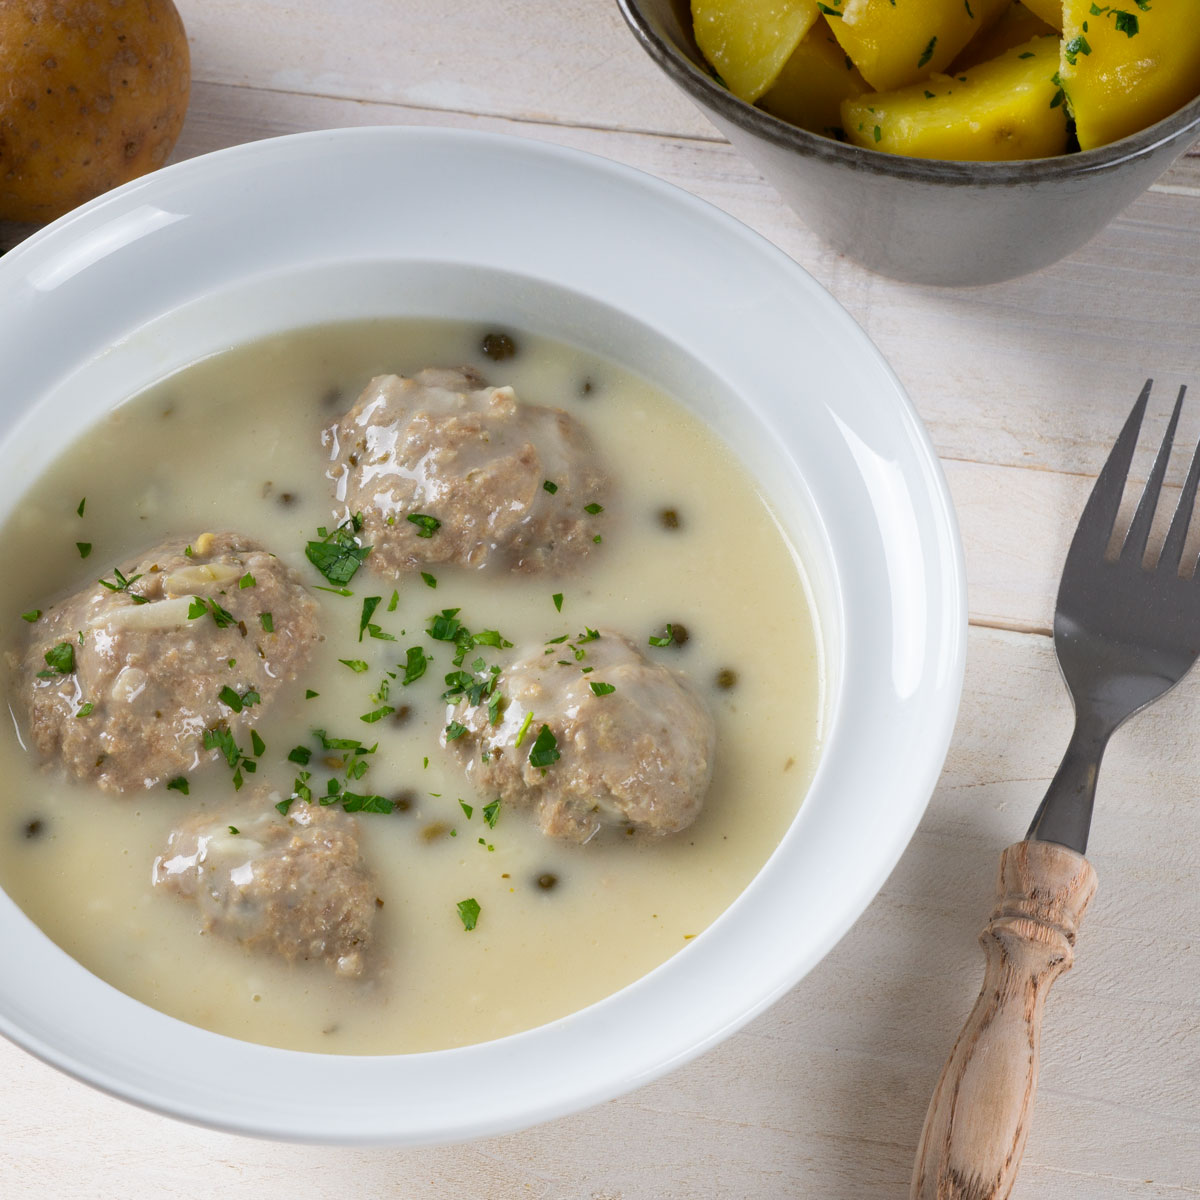 Königsberger Klopse (Meatballs with white sauce and capers)